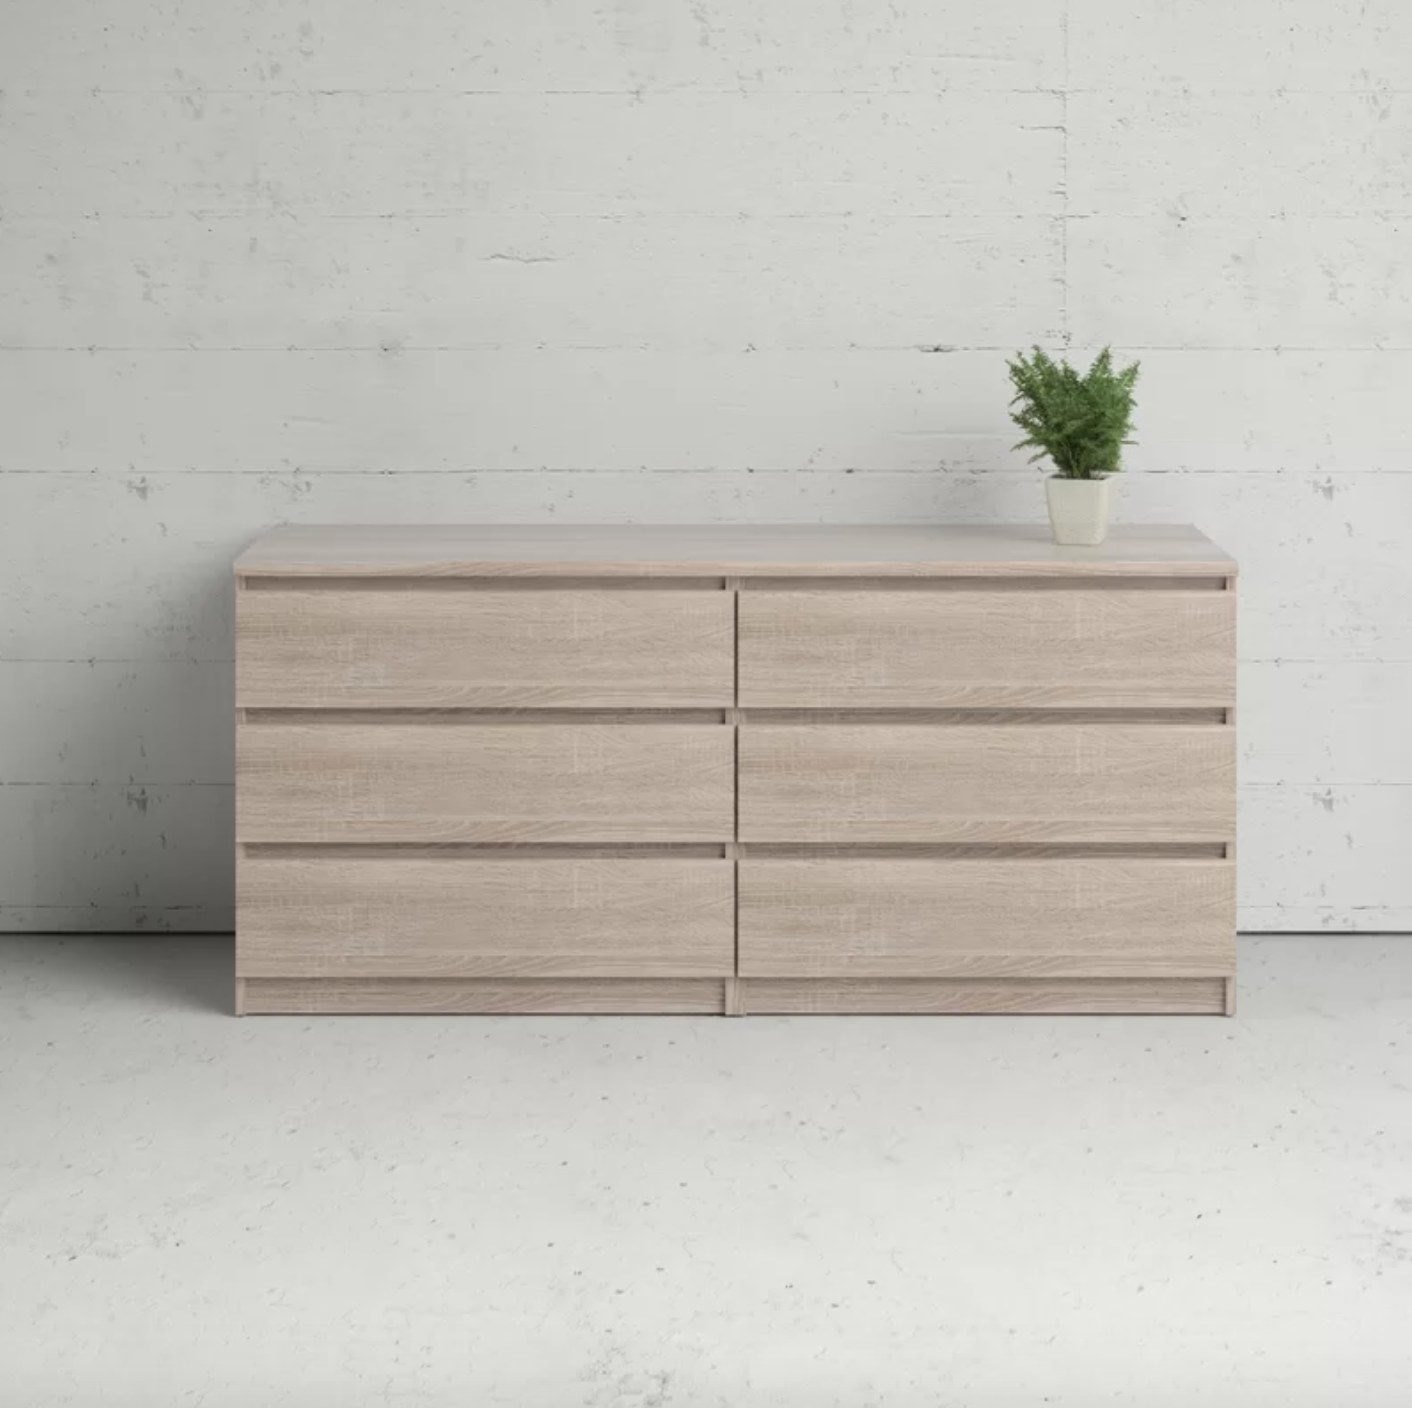 The six-drawer double dresser in truffle